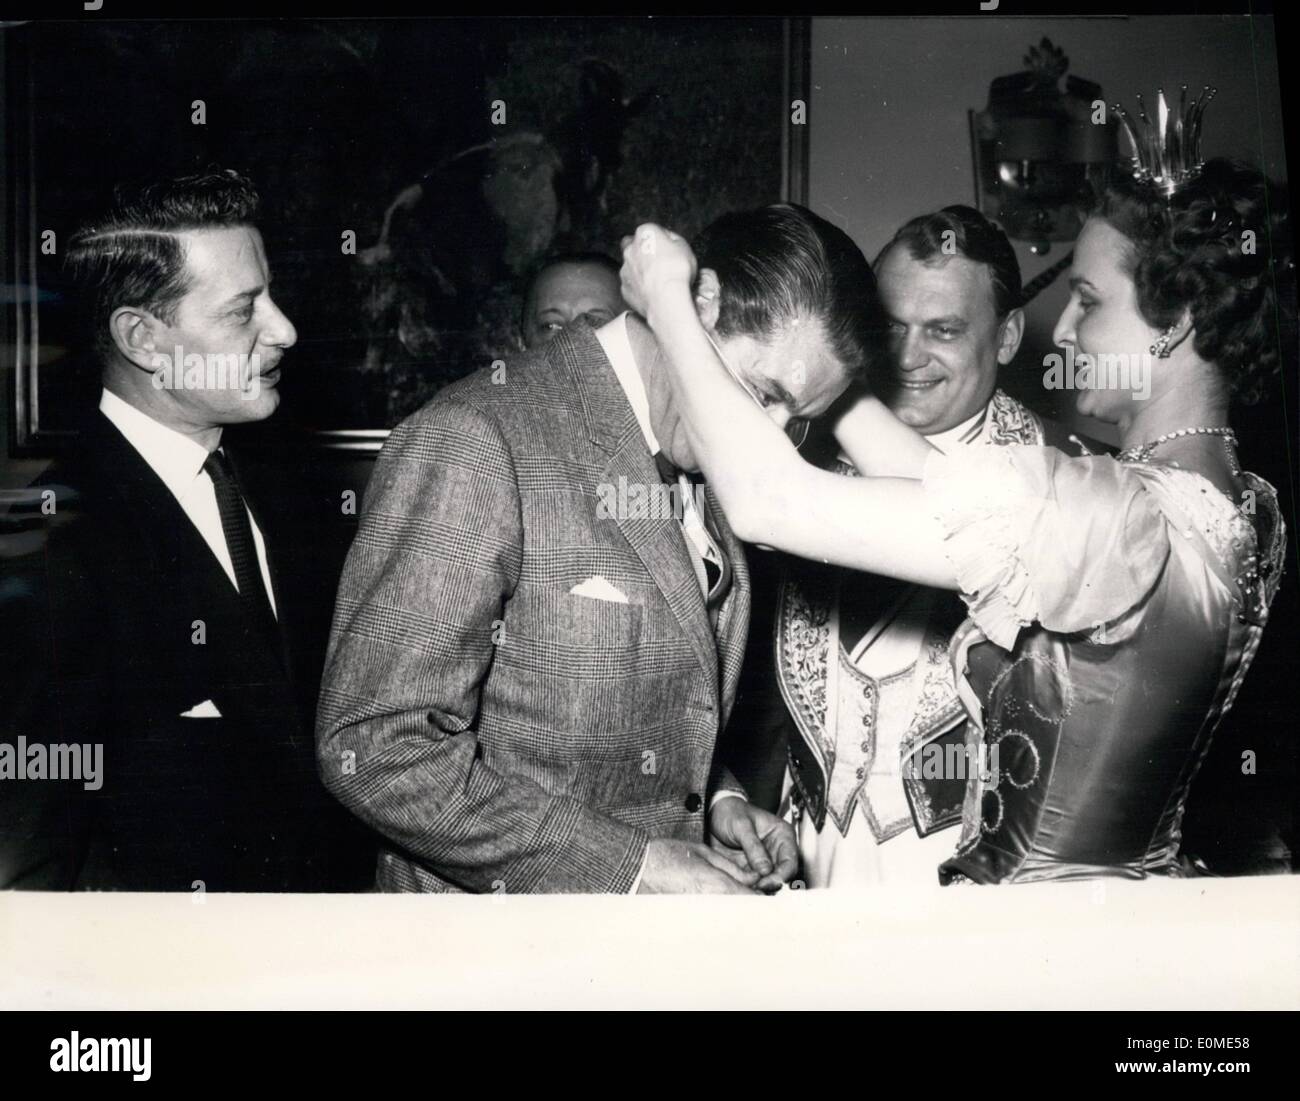 Jan. 01, 1955 - Dieter Borsche and his Co-producer: The famous German film-actor Dieter Borsche (right) met his Egyptian Co-producer Pierre Zarpanely (middle in Munich for discussing the new projects which will begin in April. The Munich Princess of Carnival decorated the foreign guest with an order. Left: Princess of Carnival Helga I. and Prince Carnival Fritz the I. Stock Photo